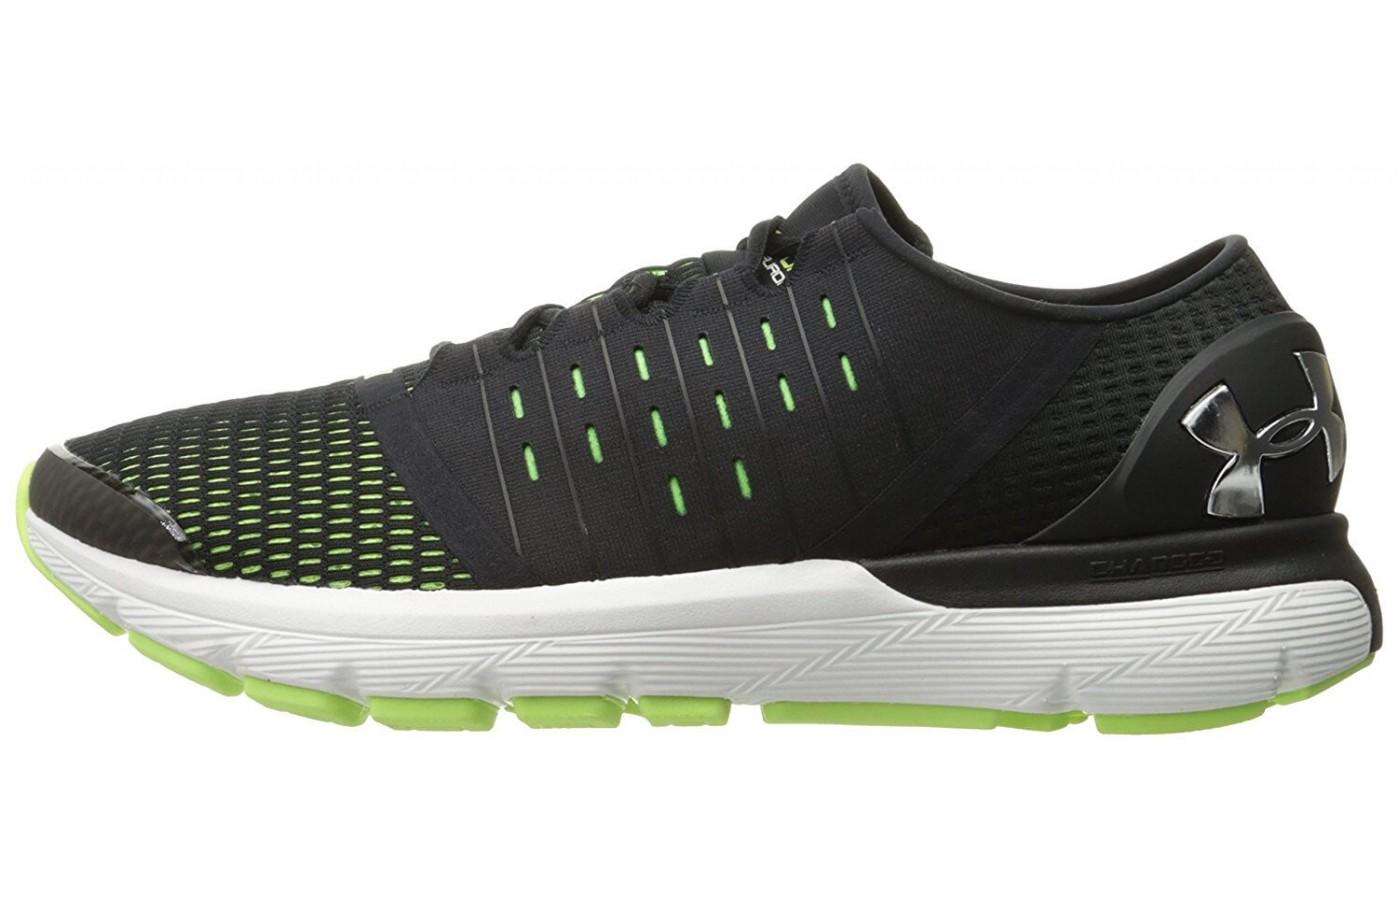 The Under Armour Speedform Europa comes in a variety of color options.